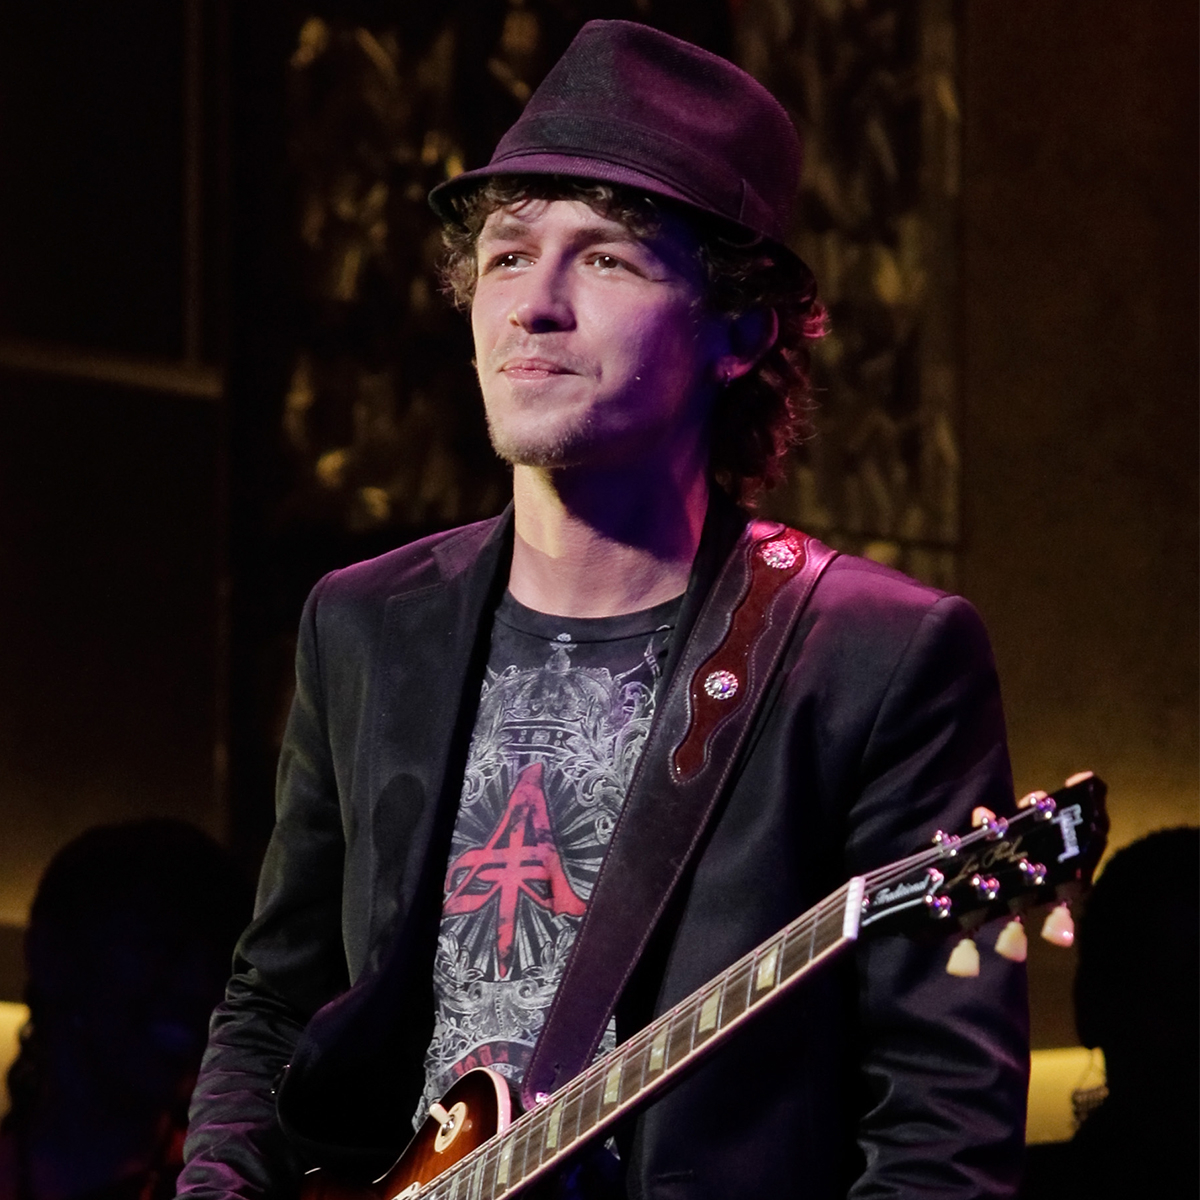 America’s Got Talent’s Michael Grimm Hospitalized and Sedated